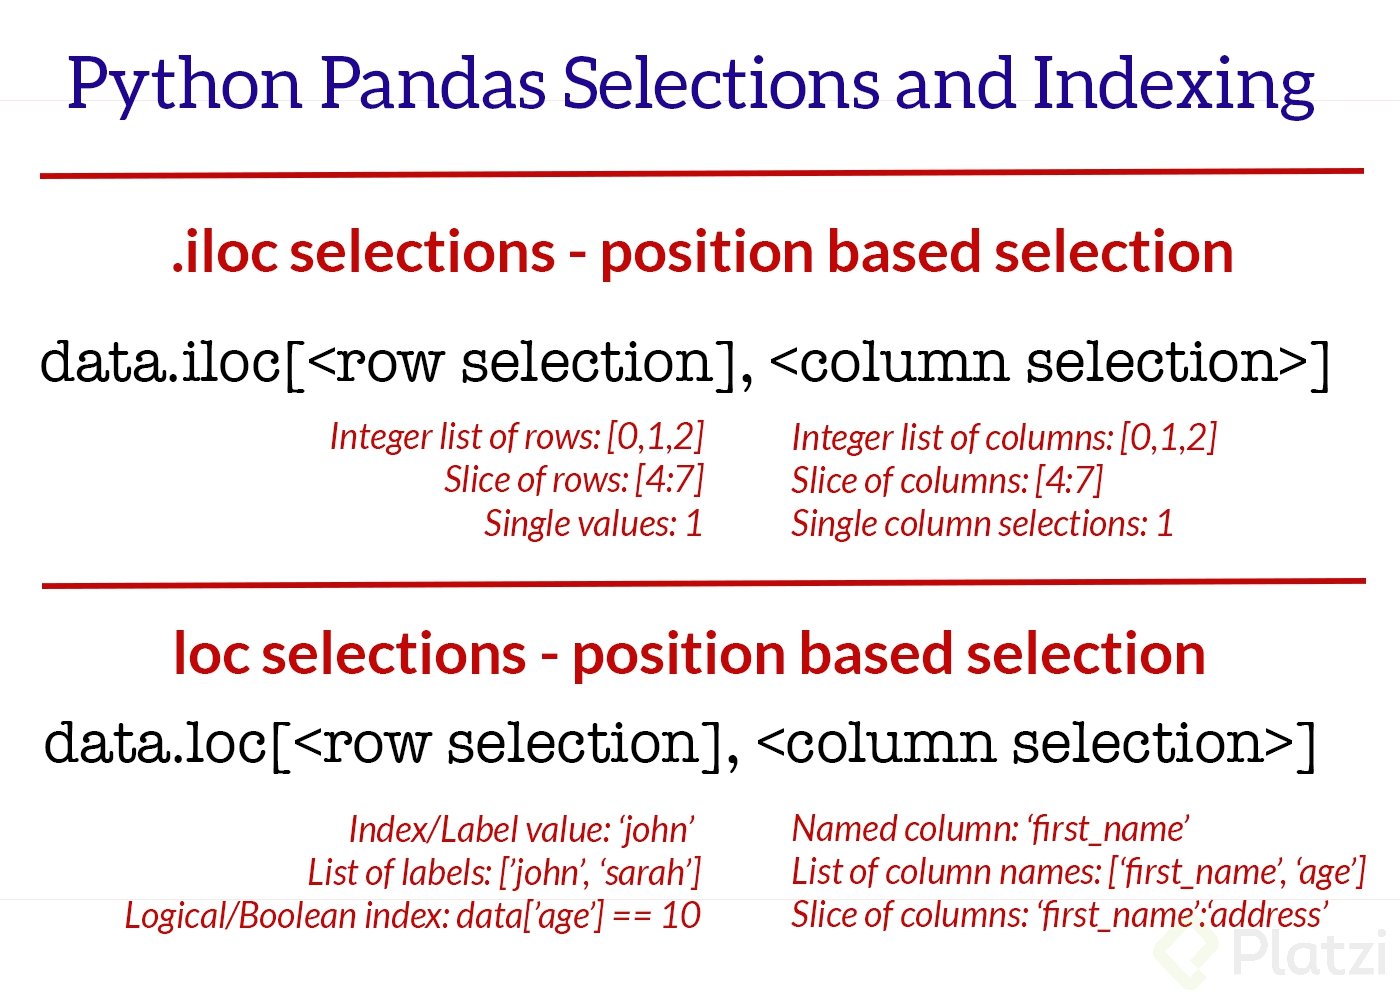 Pandas-selections-and-indexing.png